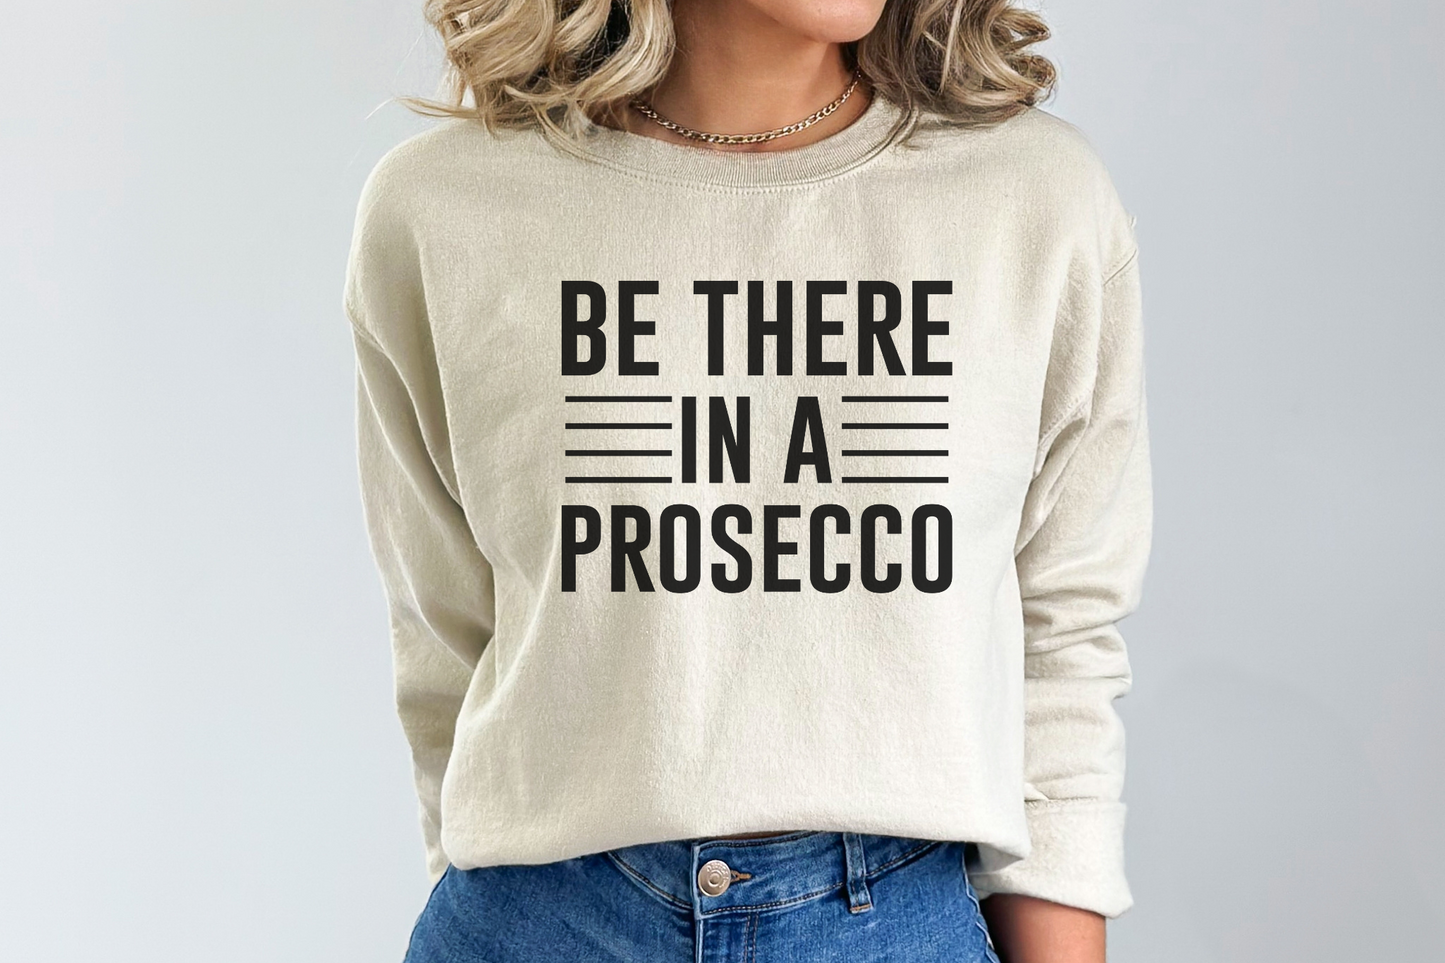 BE THERE IN A PROSECCO Sweater